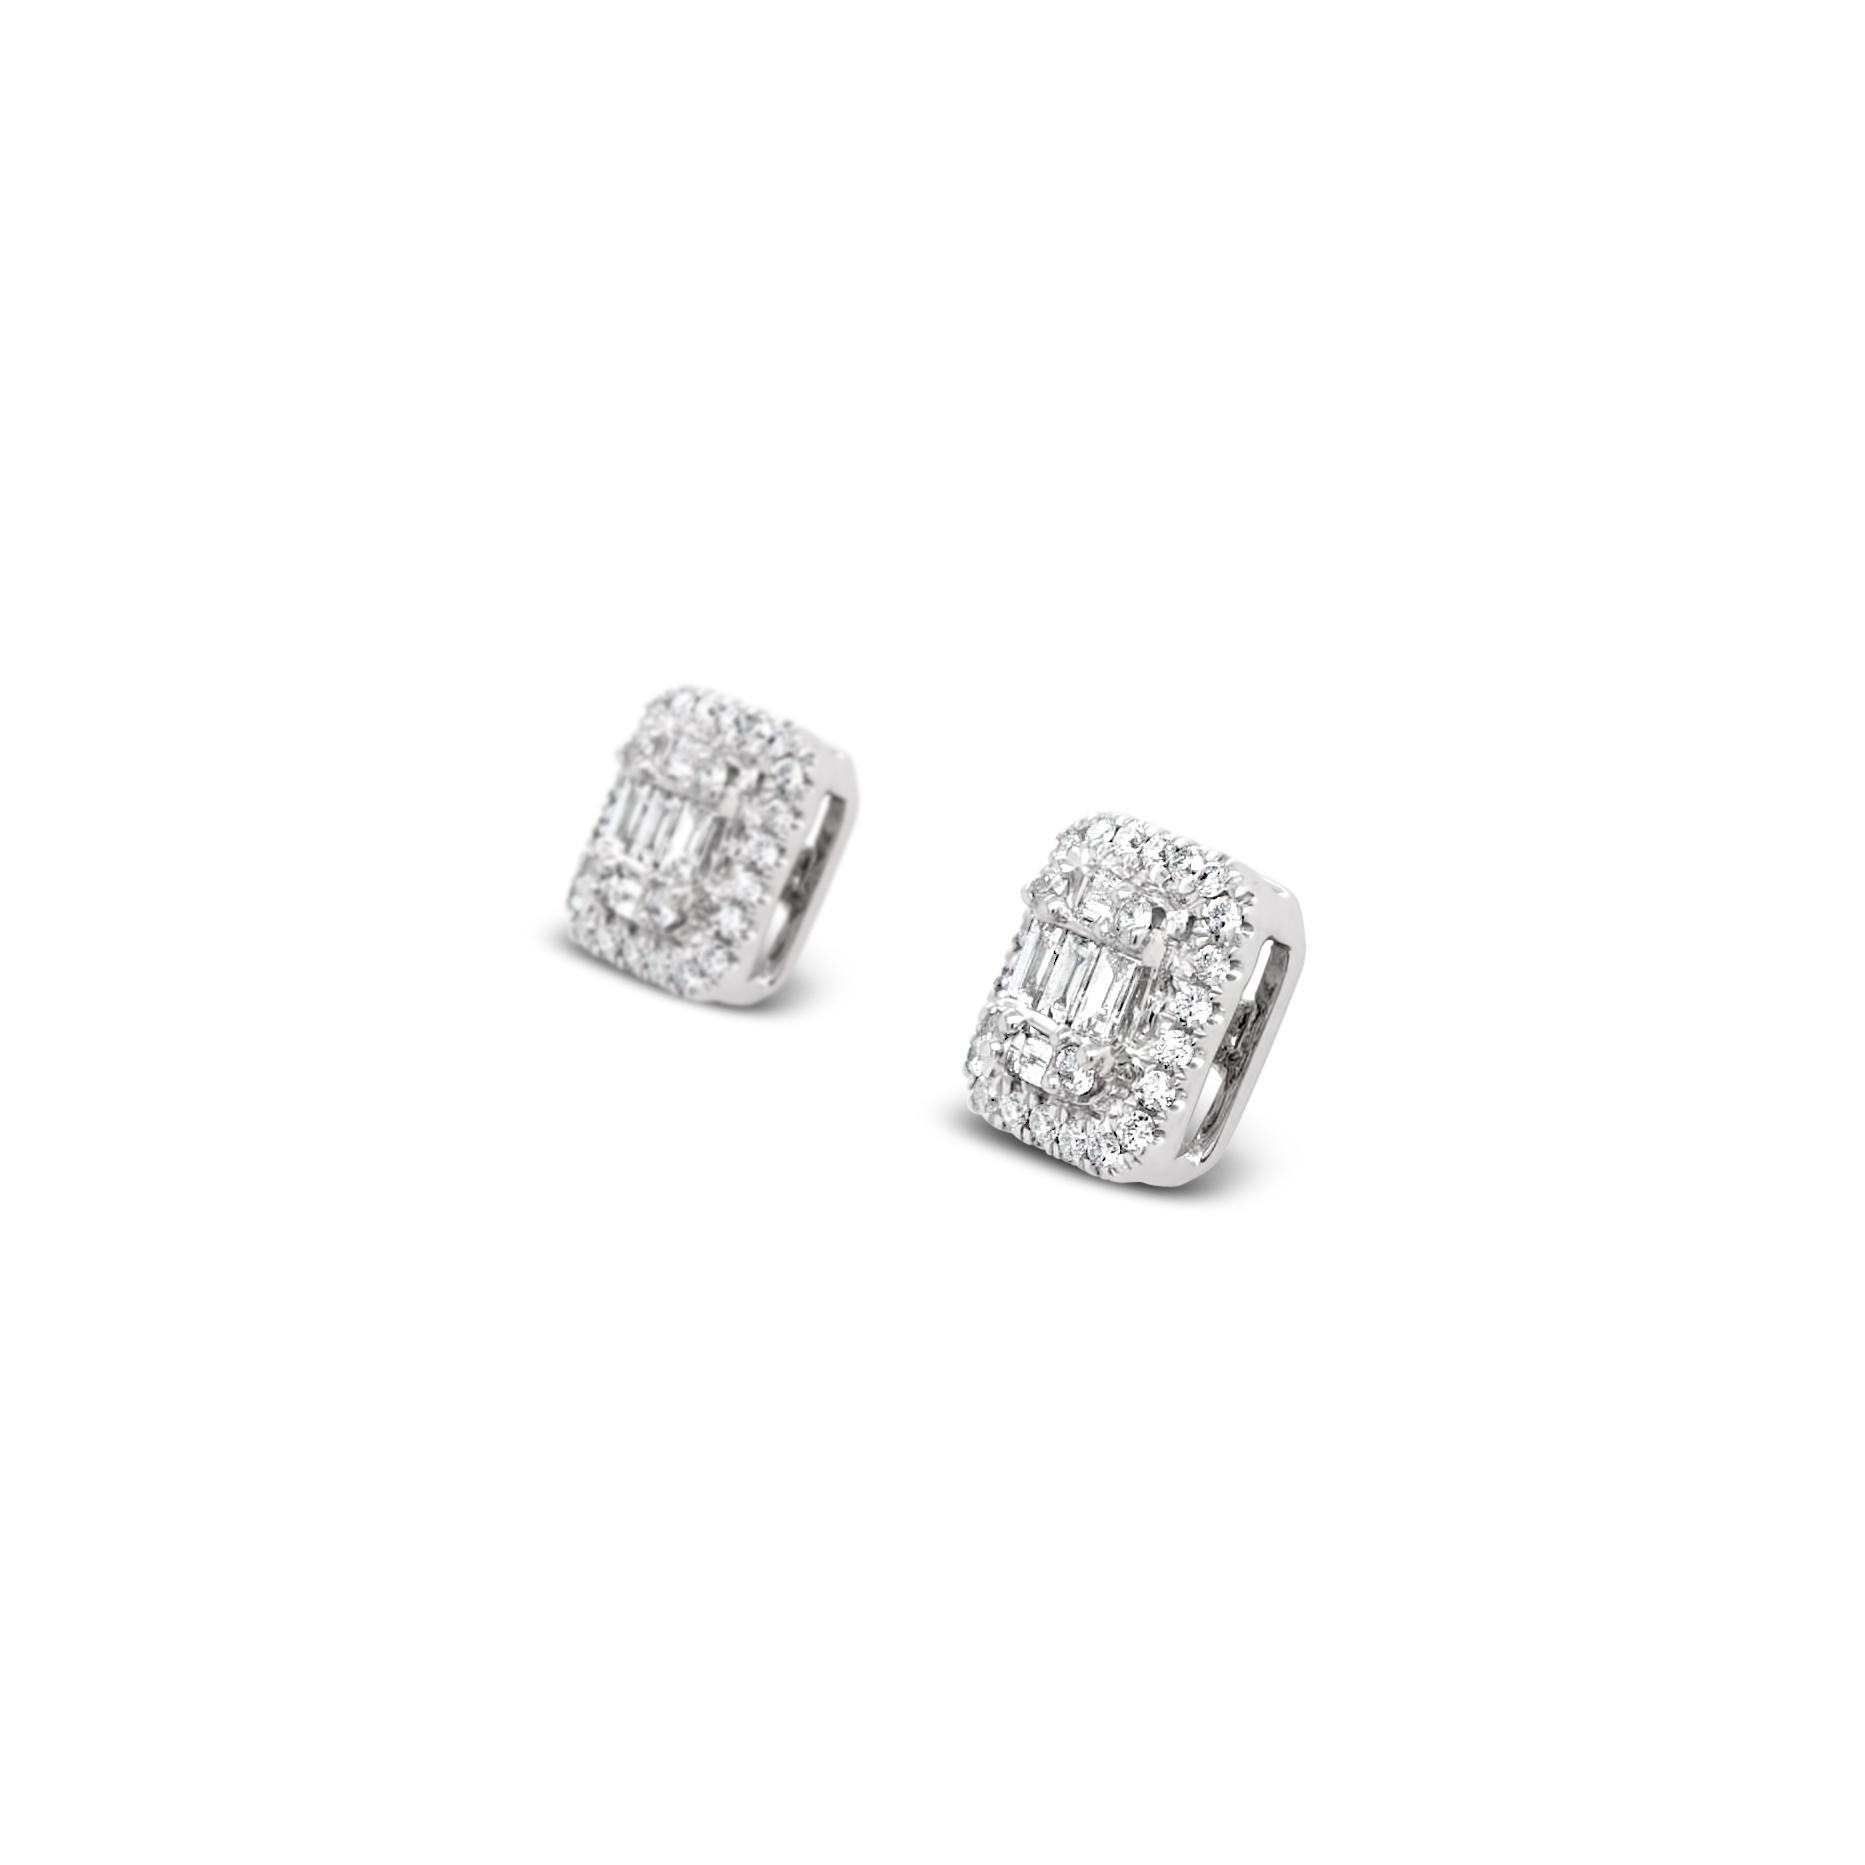 Many of our items include UK VAT at 20%. This means we may be able to remove this when you are purchasing from outside of the UK. Please message us if you would like to know about a specific item.
Material: 18ct White Gold
Stud Height: 6mm
Total